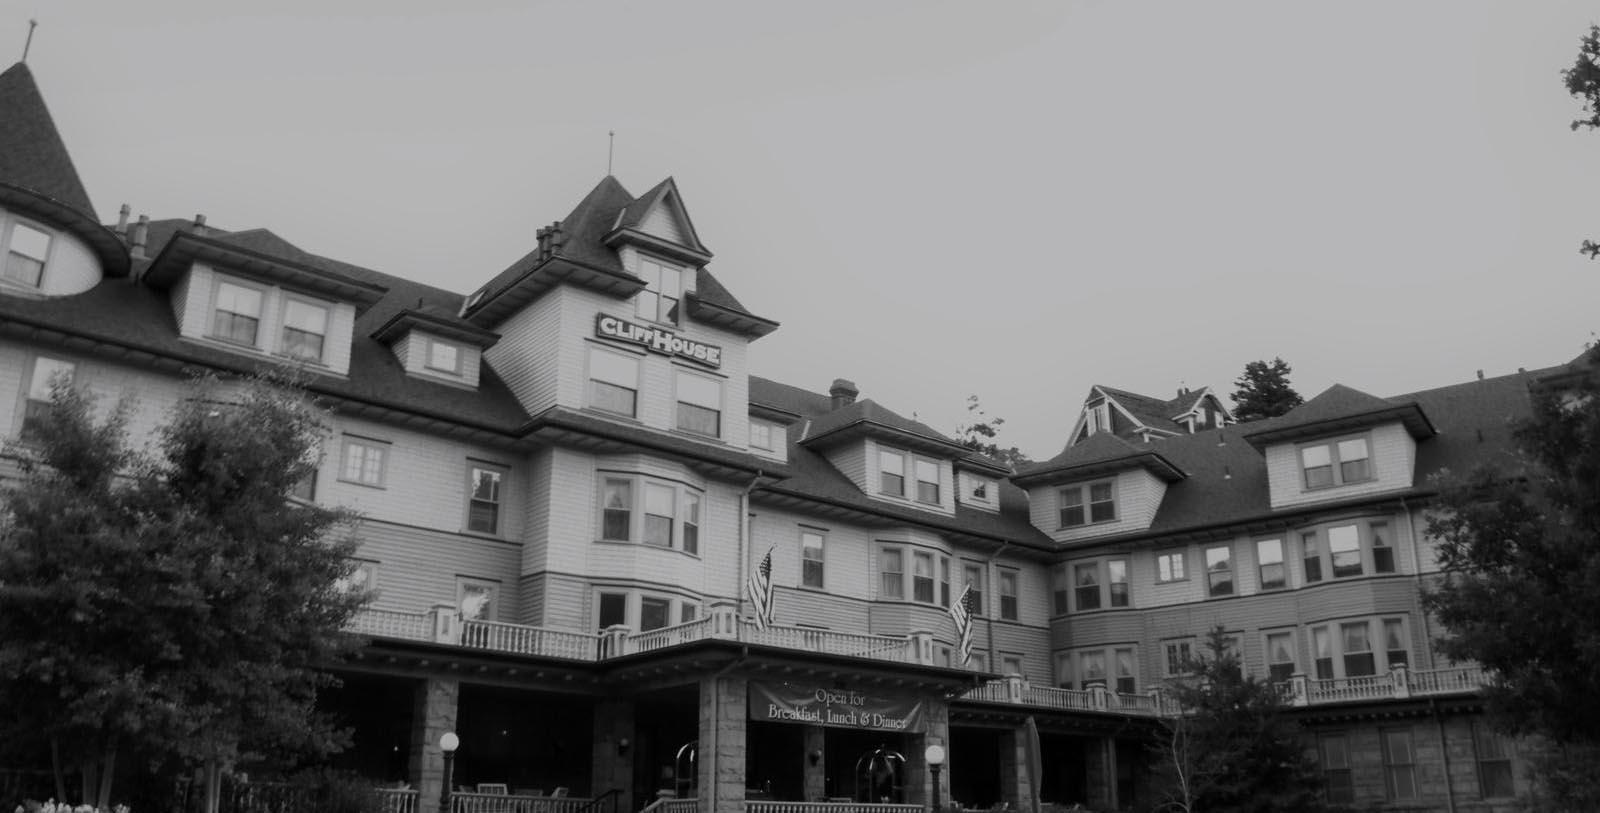 Discover the elegance of The Cliff House at Pikes Peak, a Rocky Mountain resort hotel in Manitou Springs restored to its Victorian-era glory.